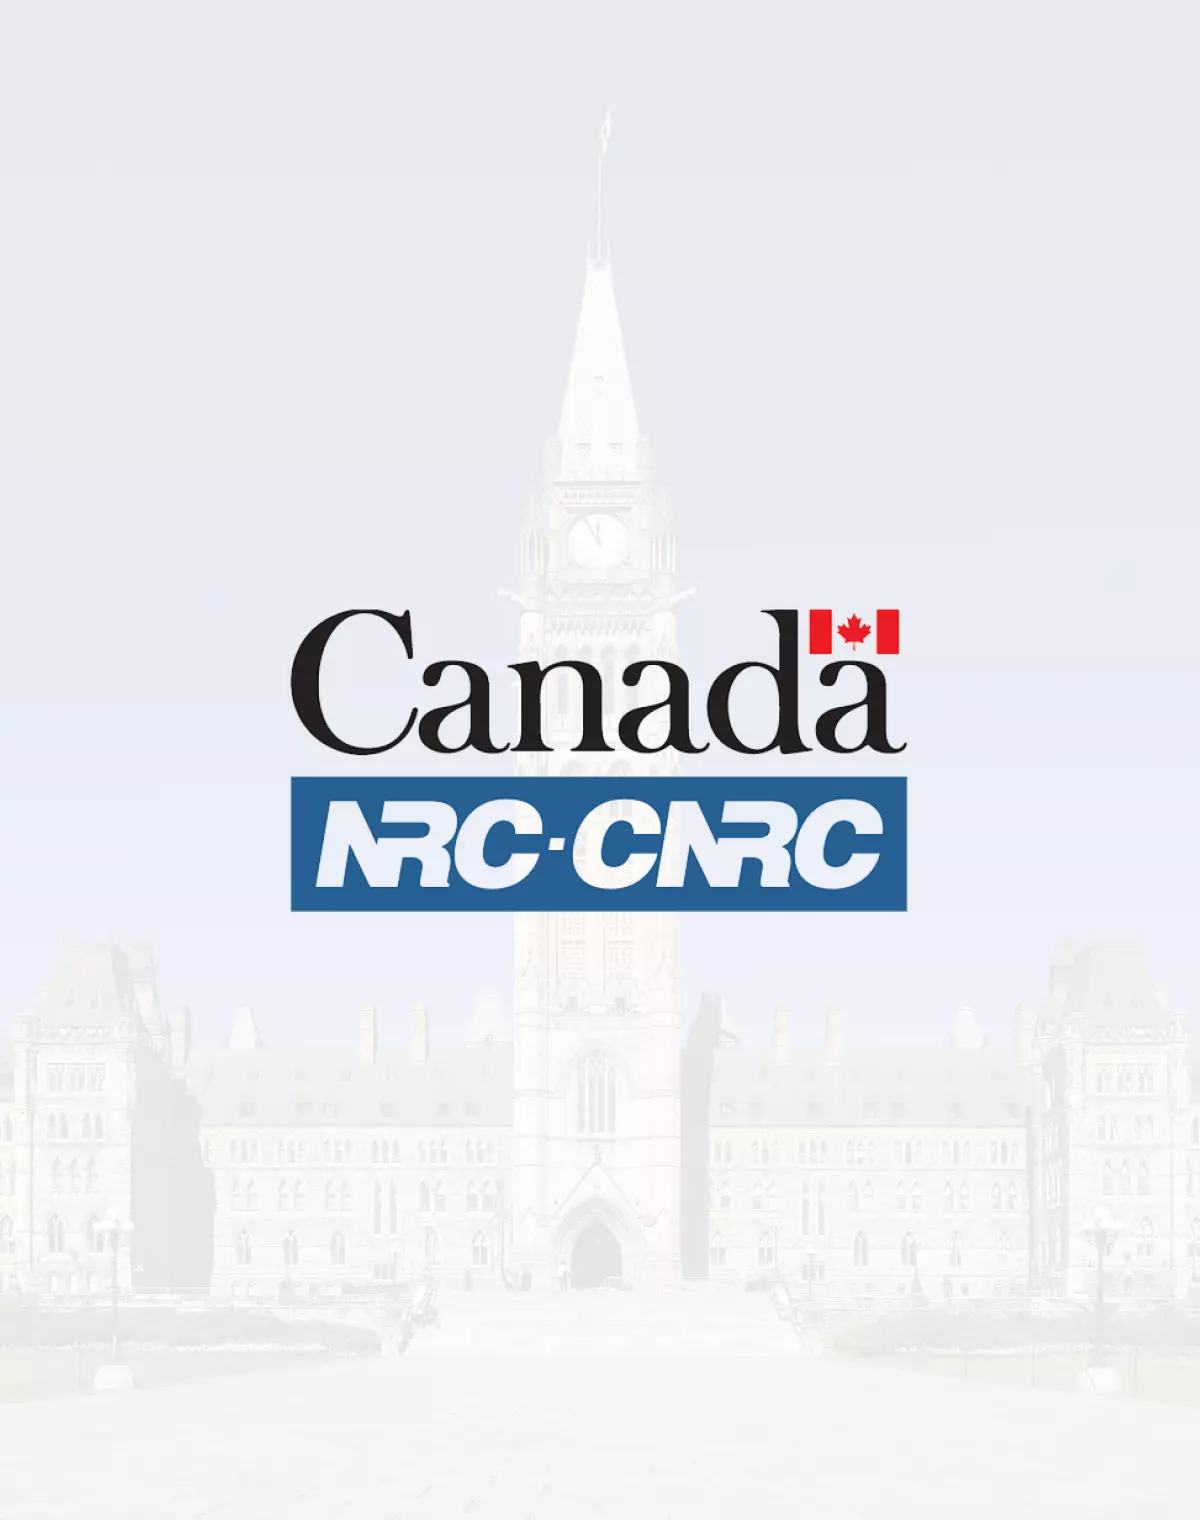 Logo button of the Canada National Research Council over top of Parliament building.